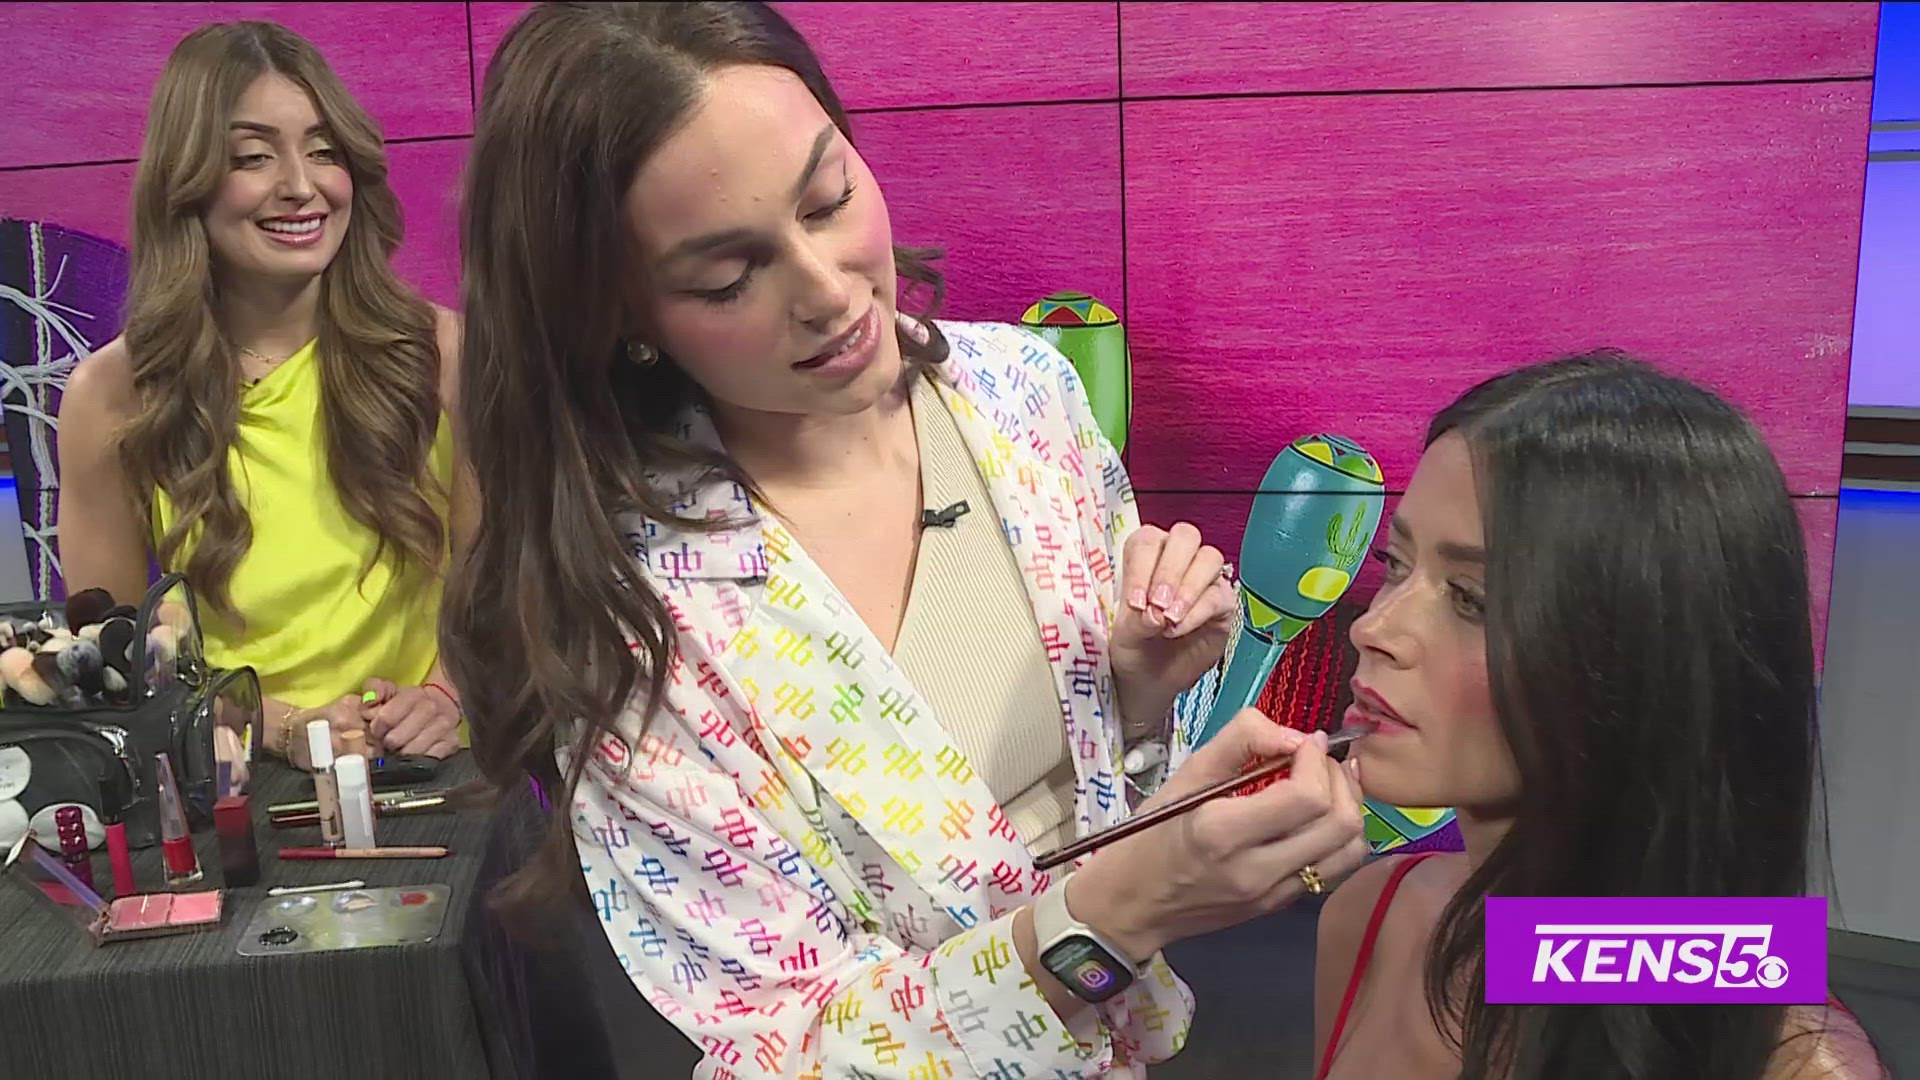 Makeup Artist Angelica Pavlova shares tips on how to get the perfect makeup look for Fiesta.